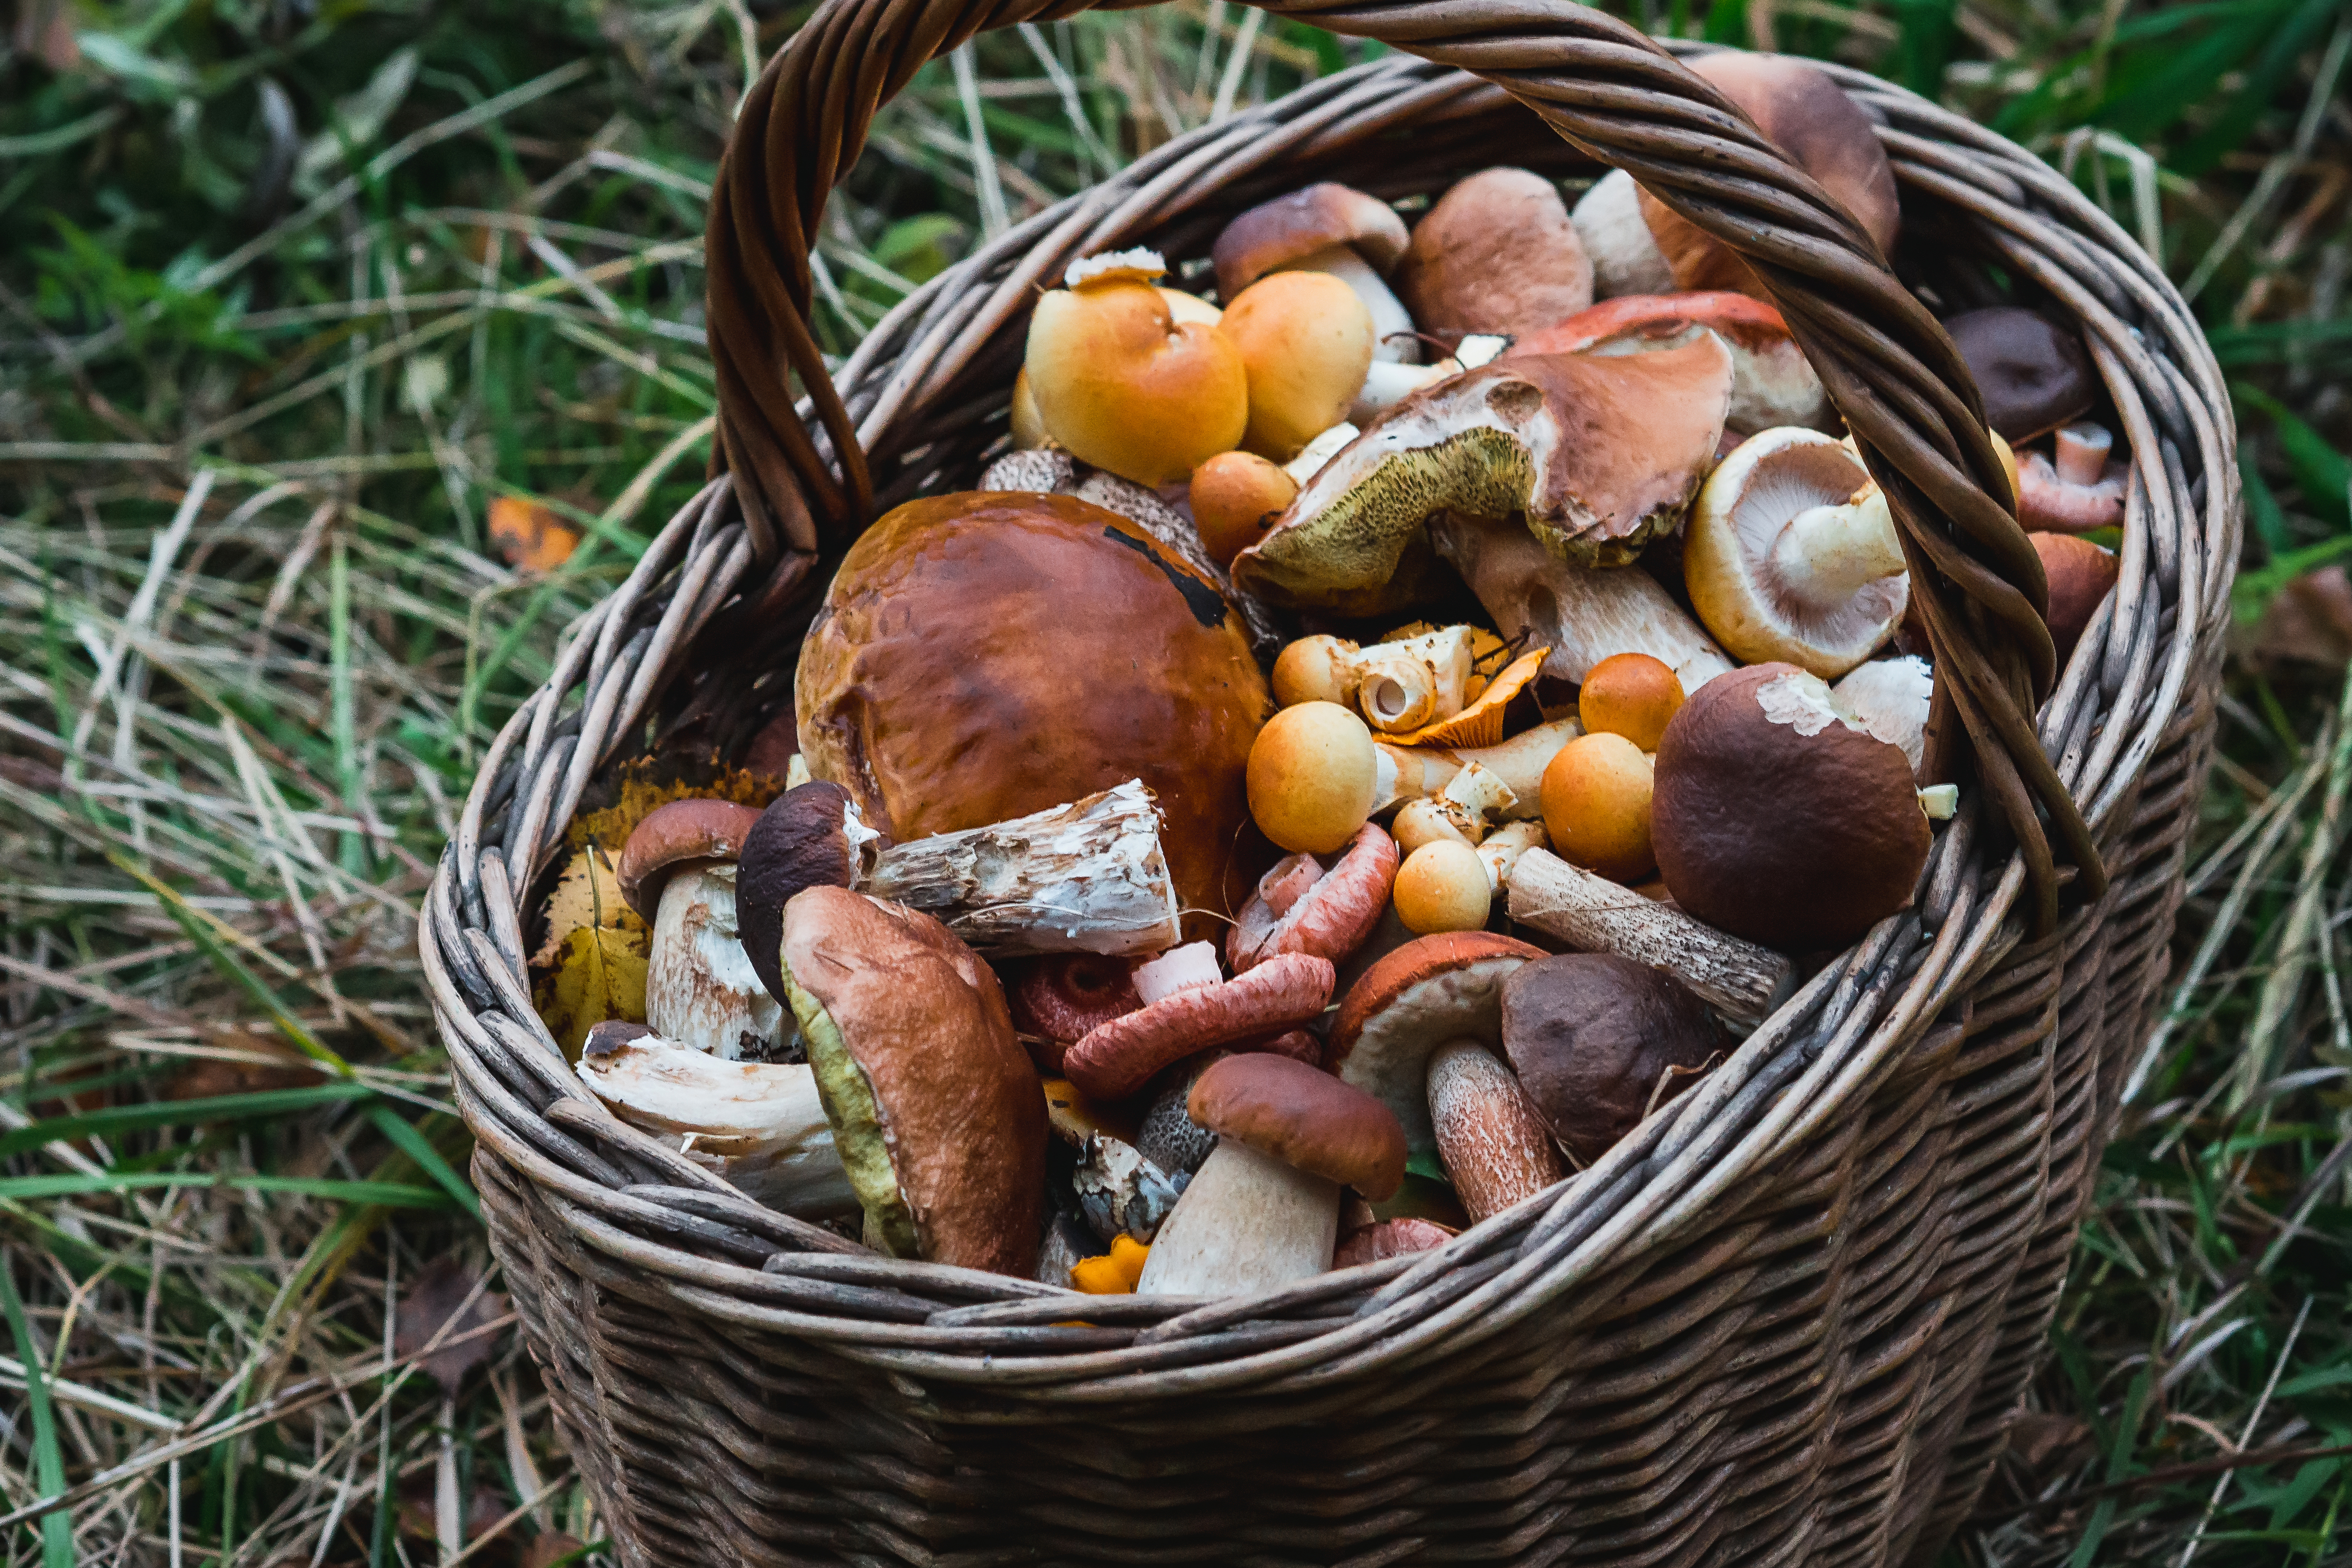 Forage Your Own Wild Mushrooms In Oregon This Fall That Oregon Life